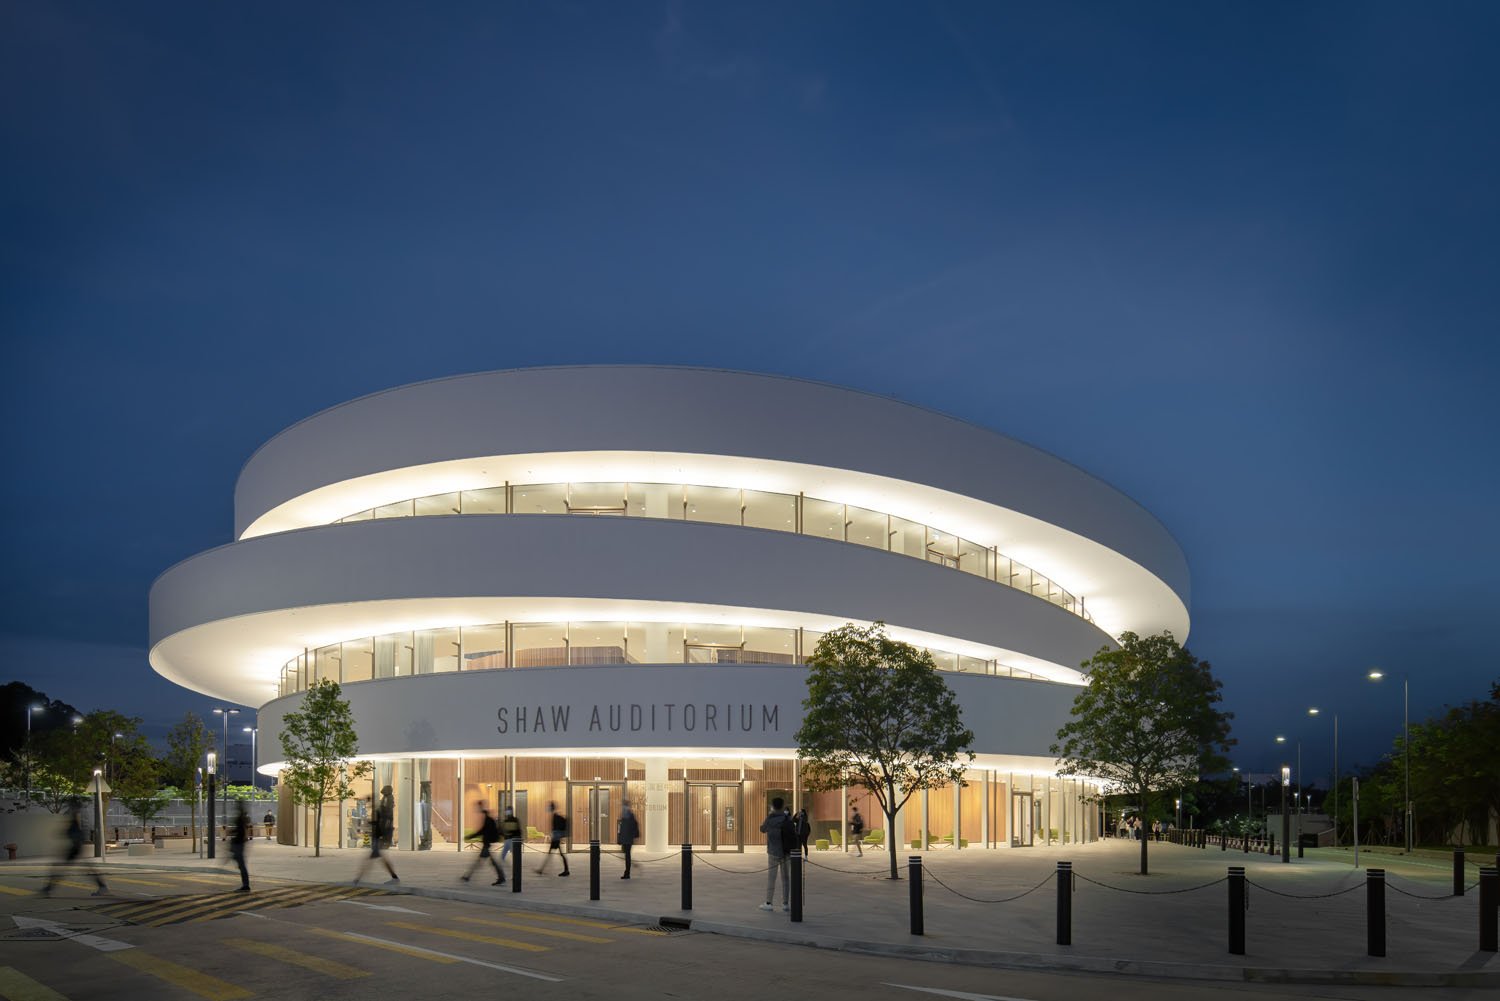 The stunning Auditorium is a new to